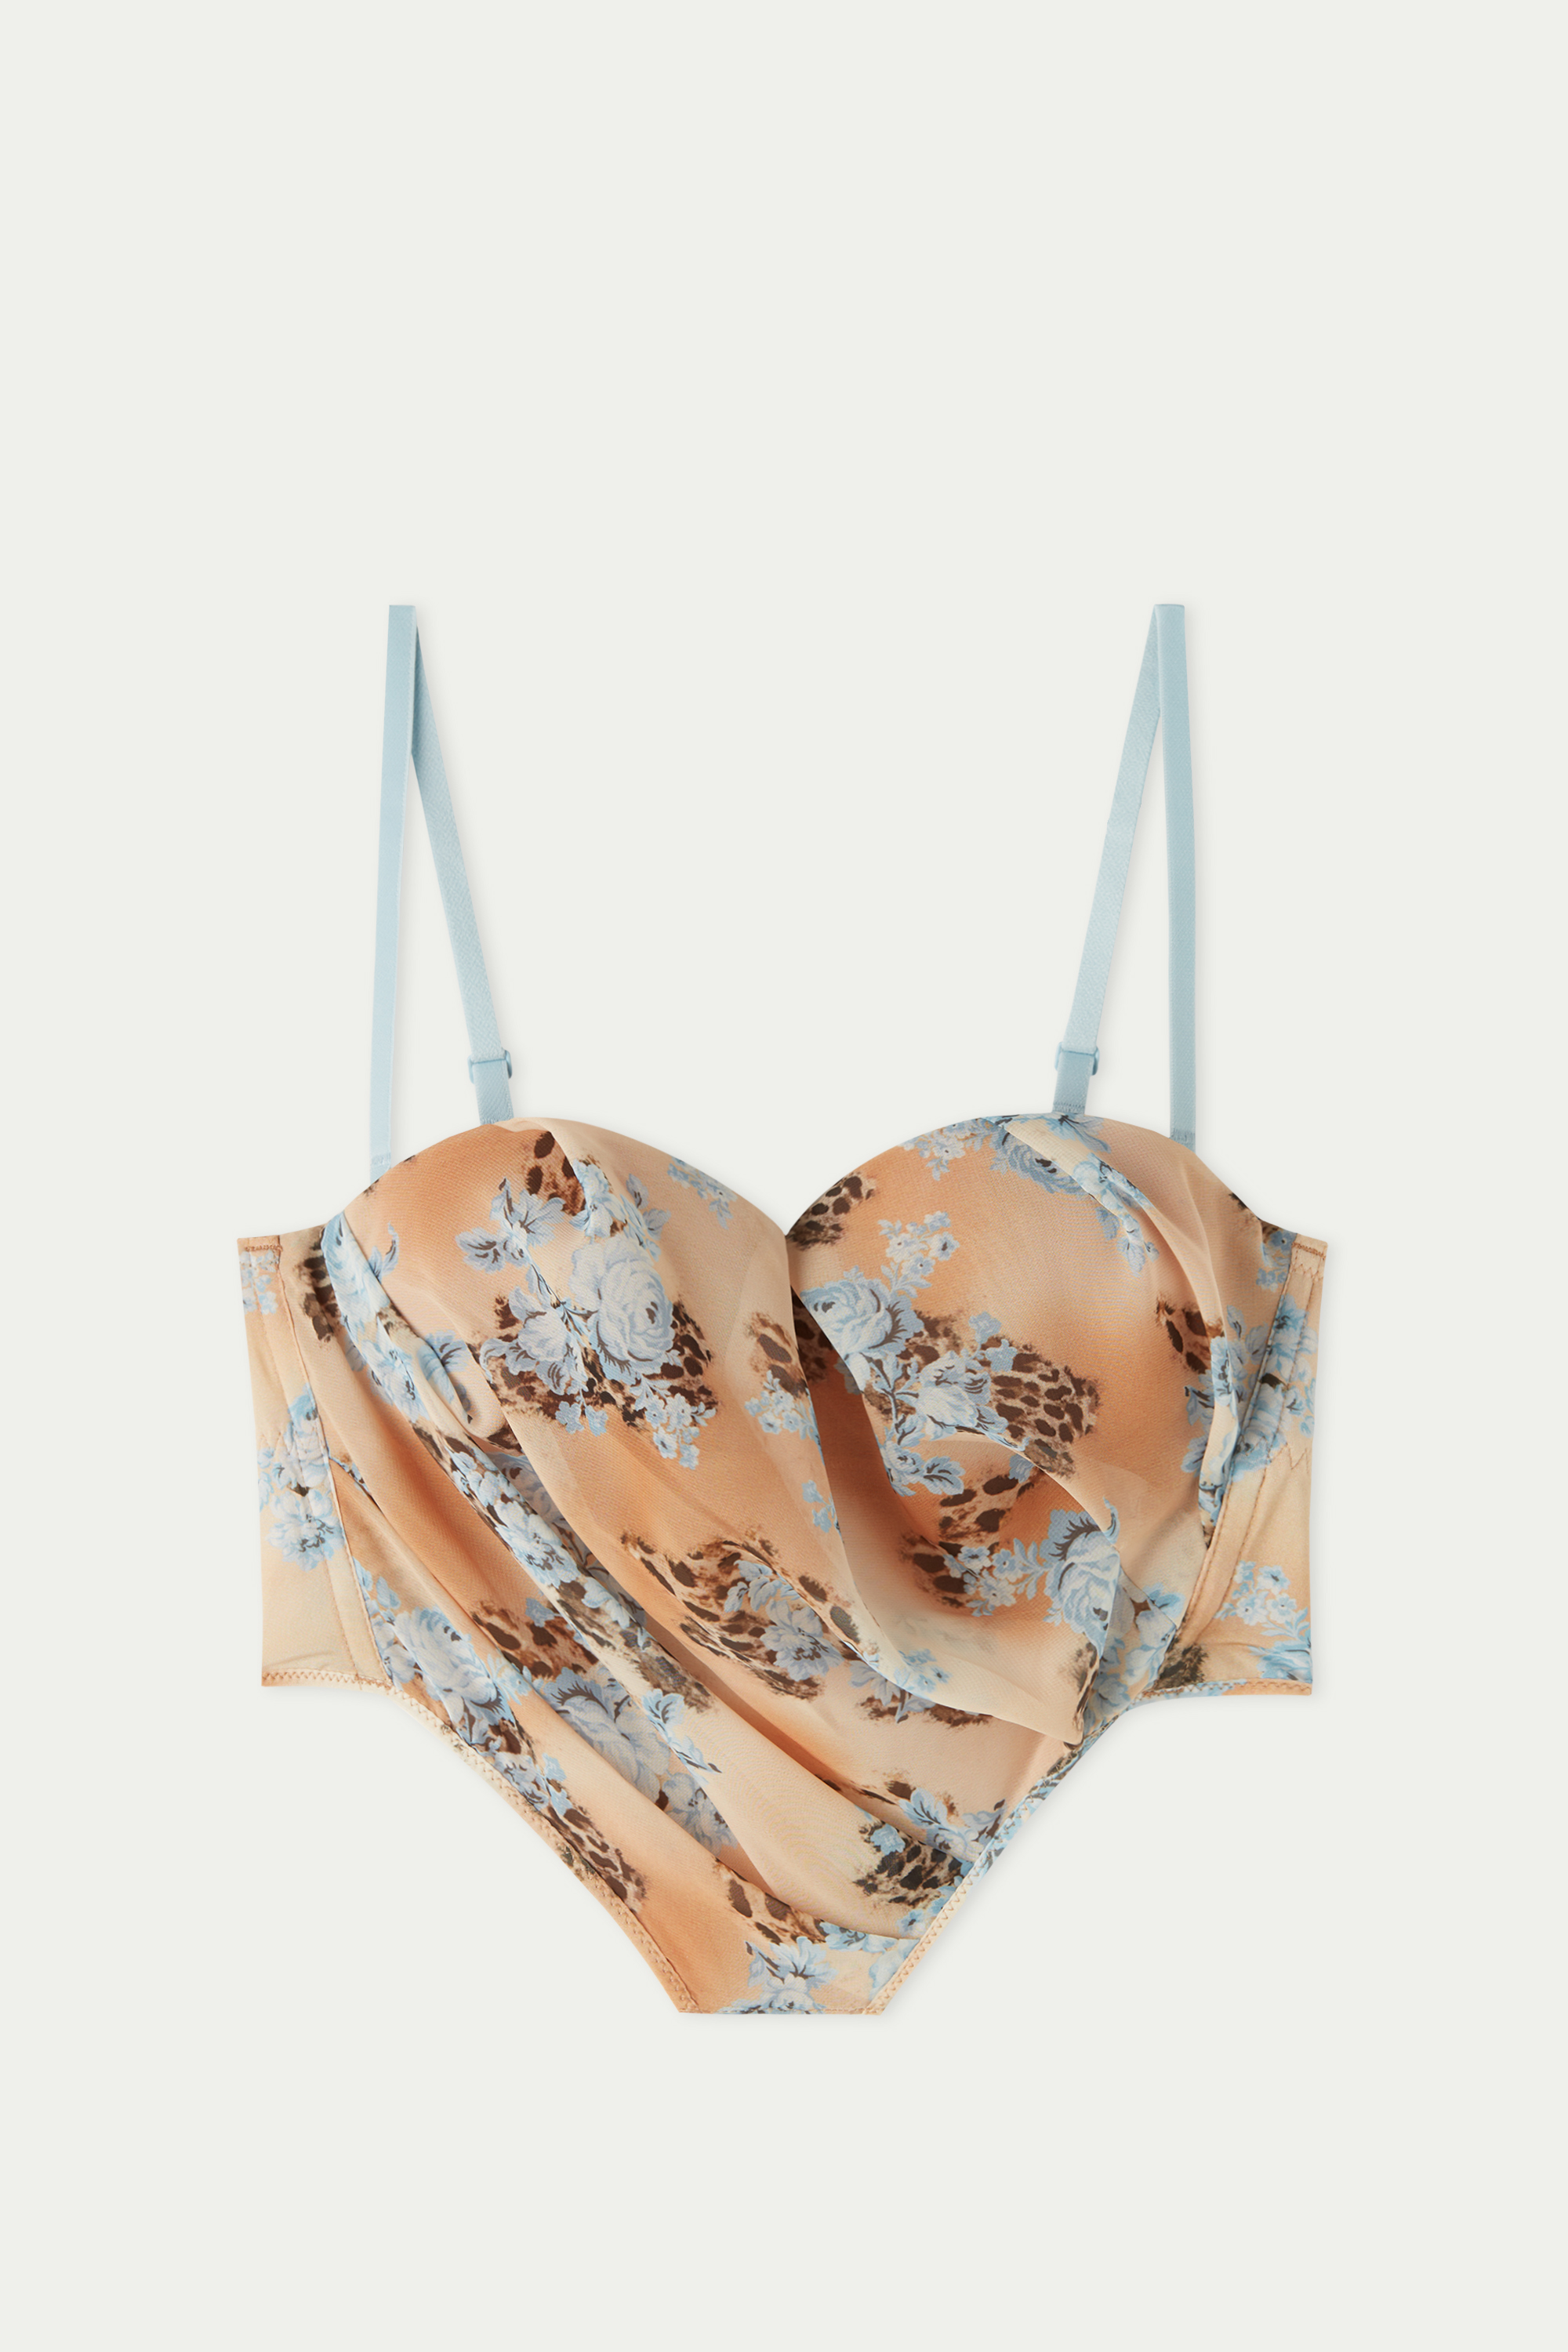 Bra-Top-BH Country Flowers